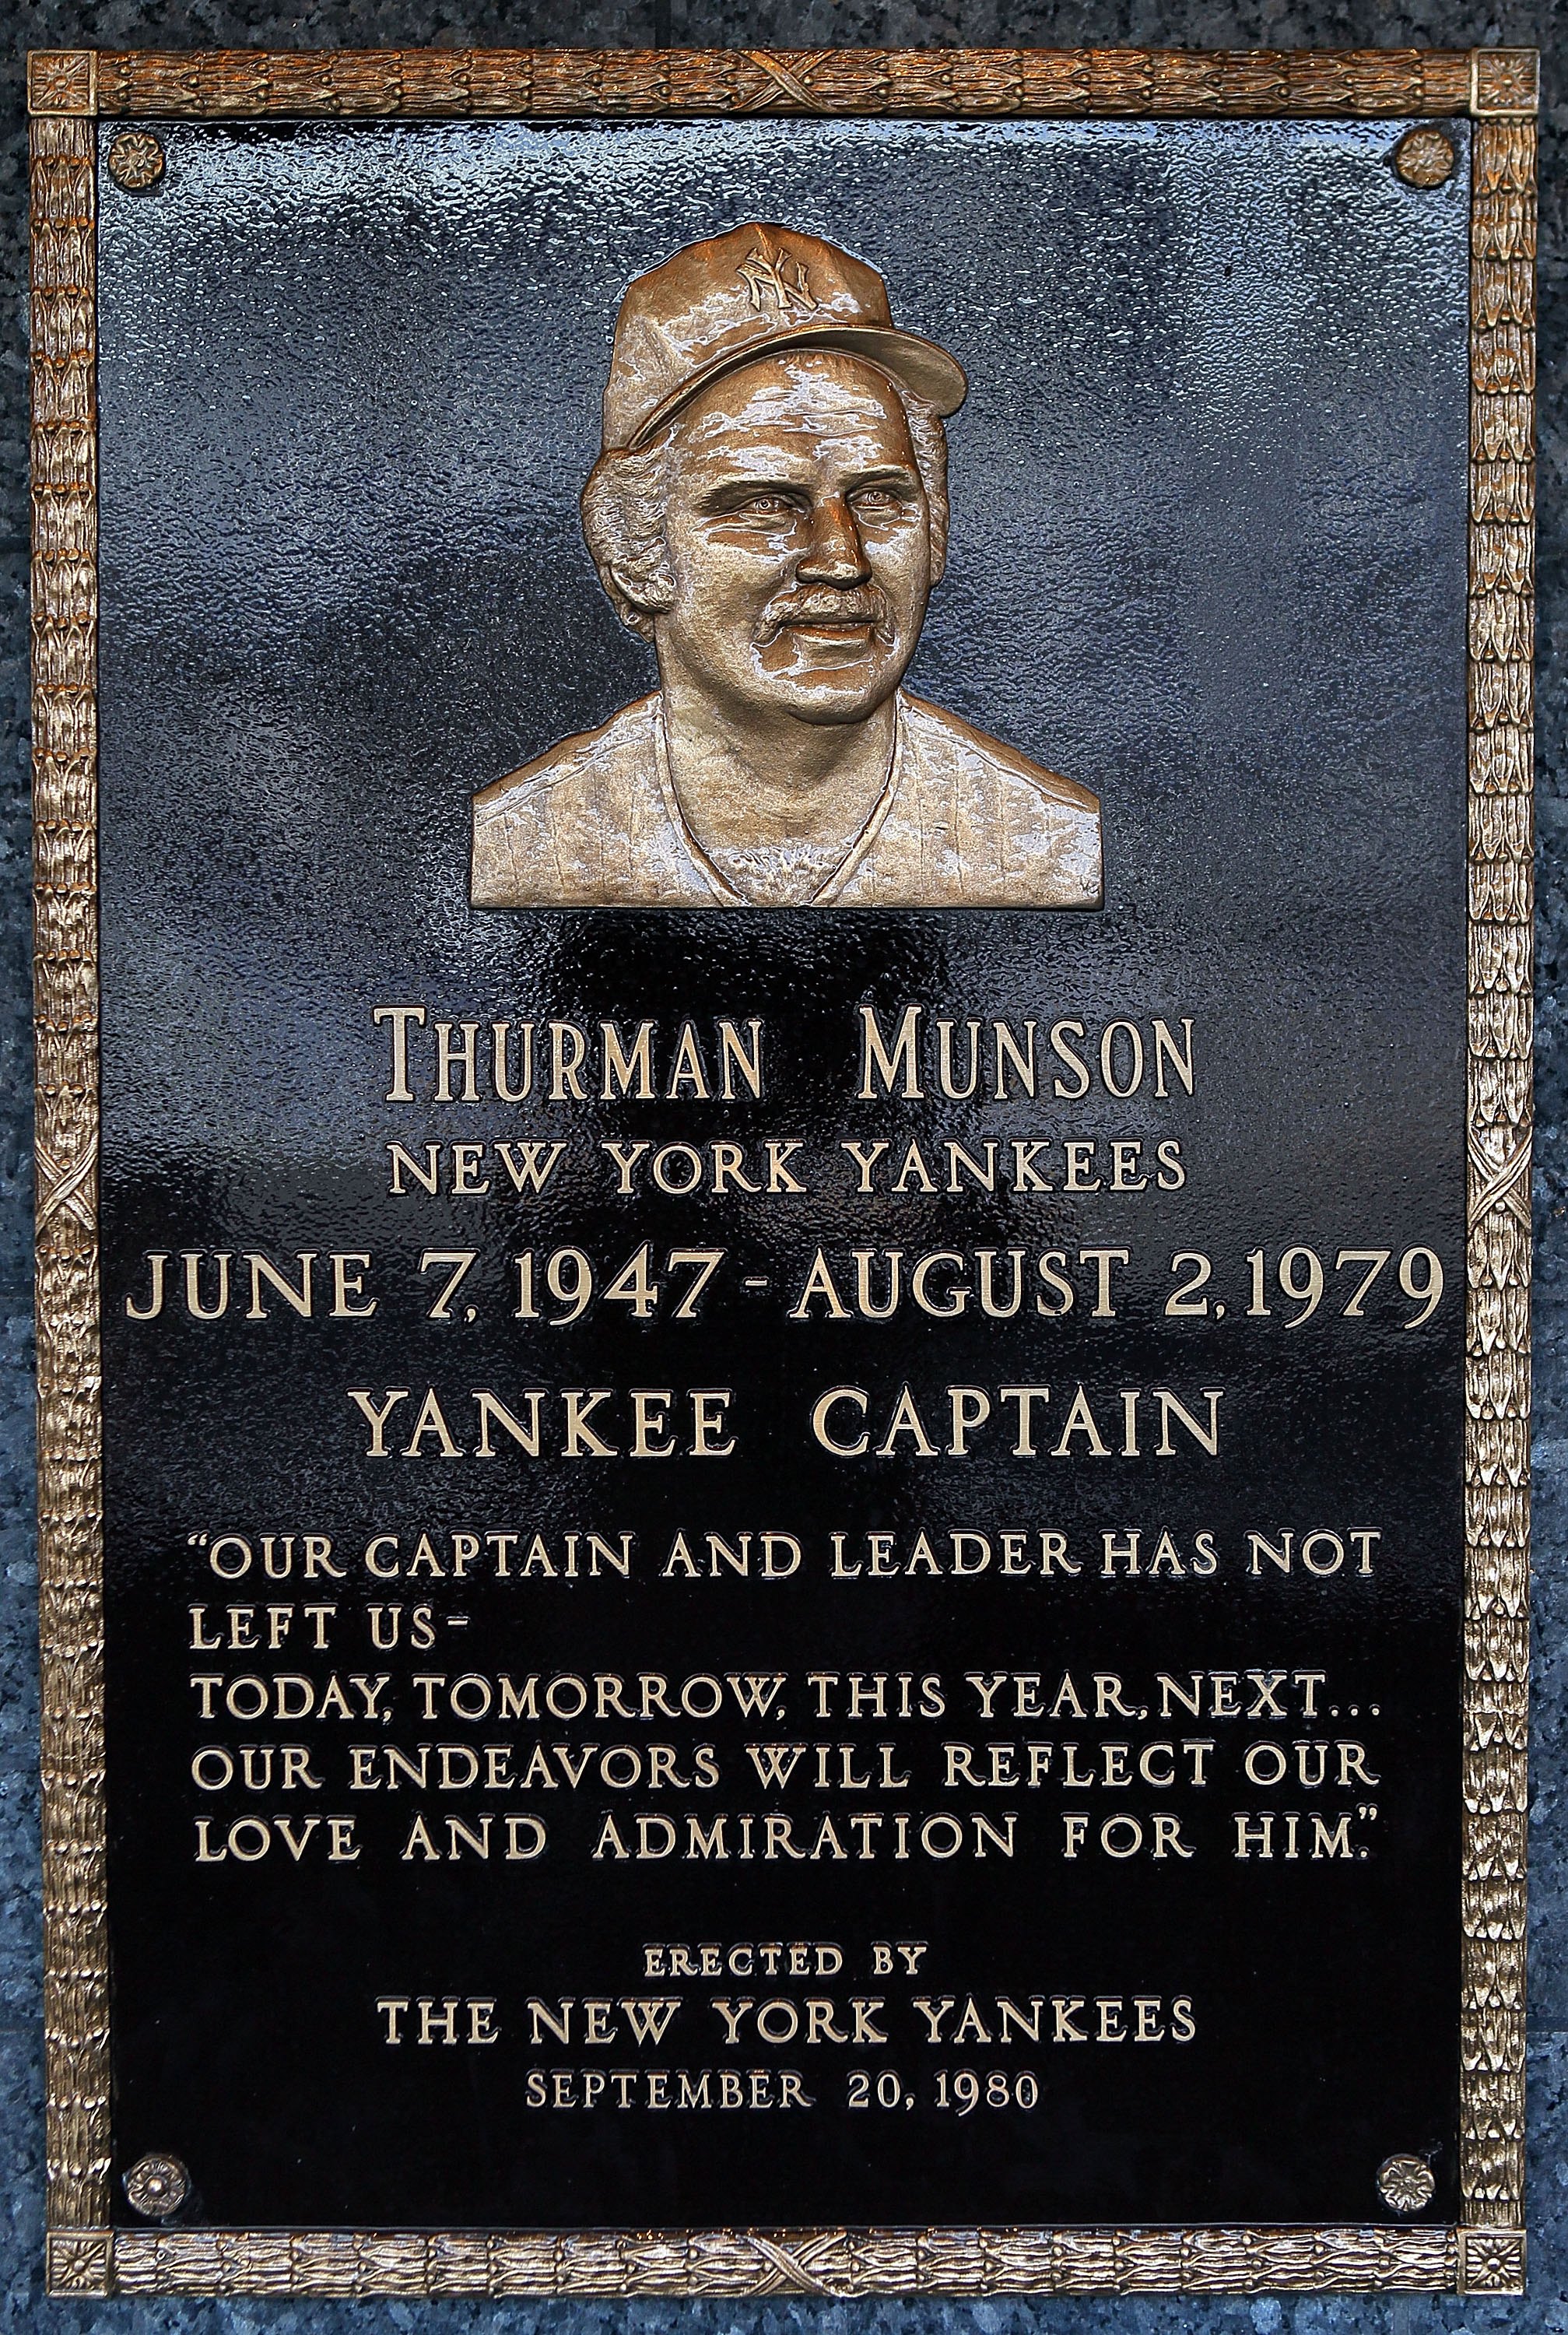 NEW YORK - MAY 02:  The plaque of Thurman Munson is seen in Monument Park at Yankee Stadium prior to game between the New York Yankees and the Chicago White Sox on May 2, 2010 in the Bronx borough of New York City. The Yankees defeated the White Sox 12-3.